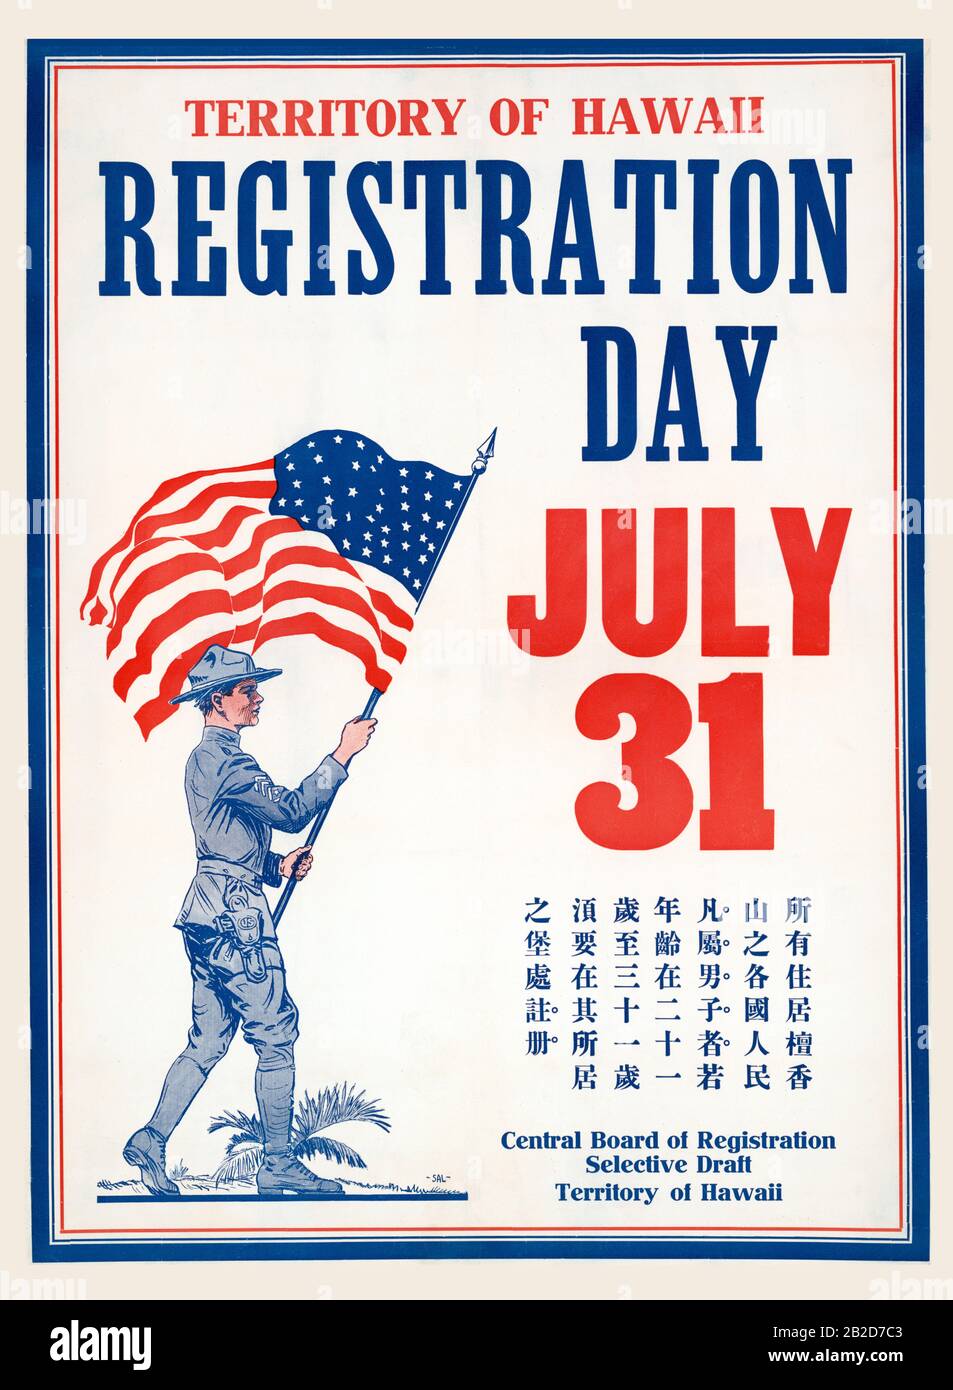 Territory of Hawaii registration day July 31 - Chinese Stock Photo